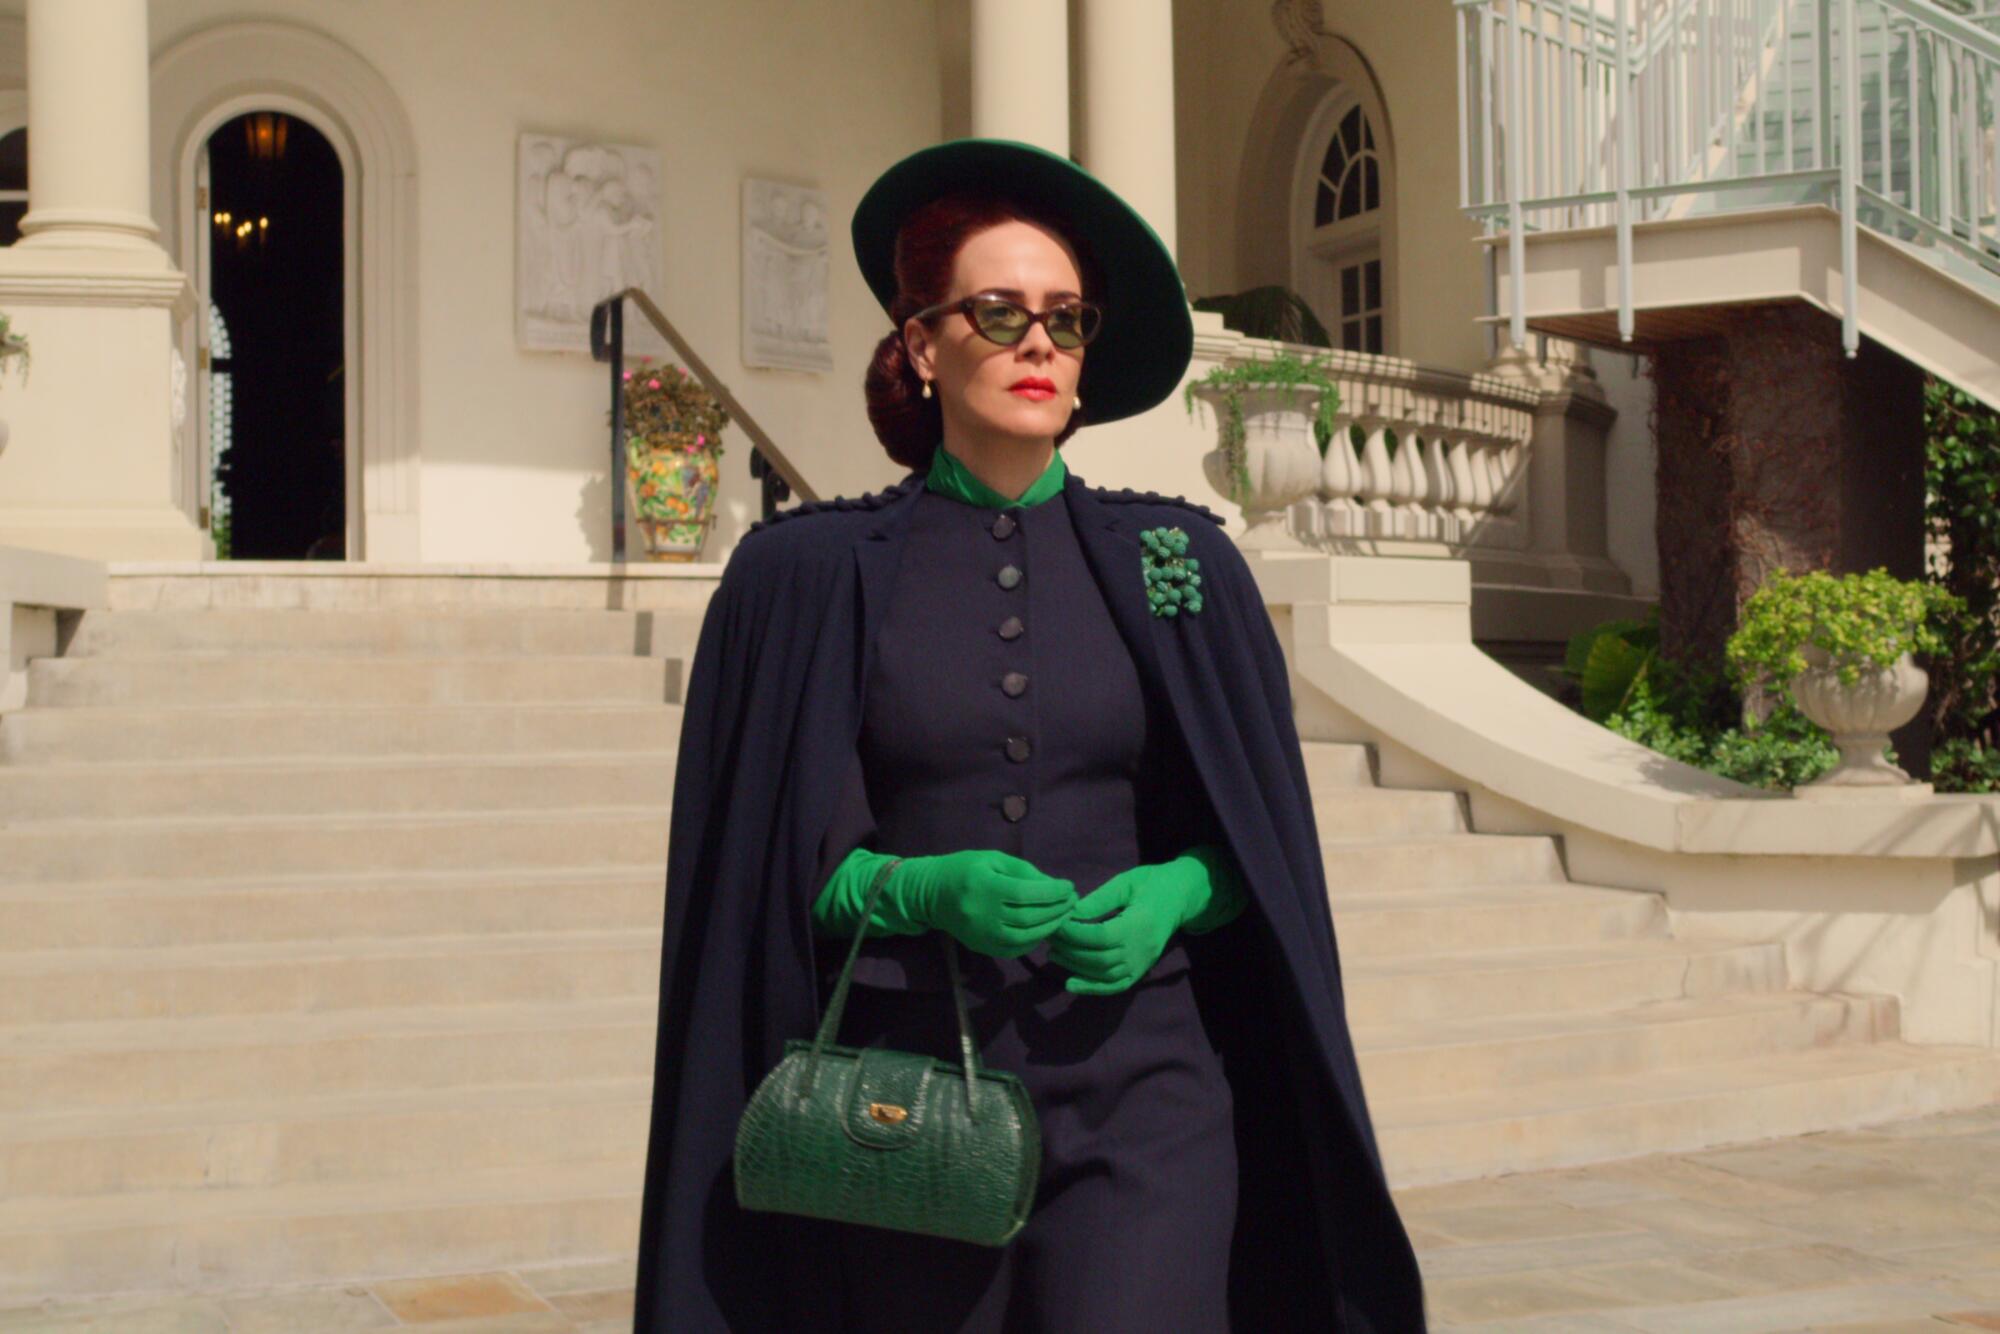 A woman in a black cape and hat, sunglasses and green gloves outside a building on a sunny day.